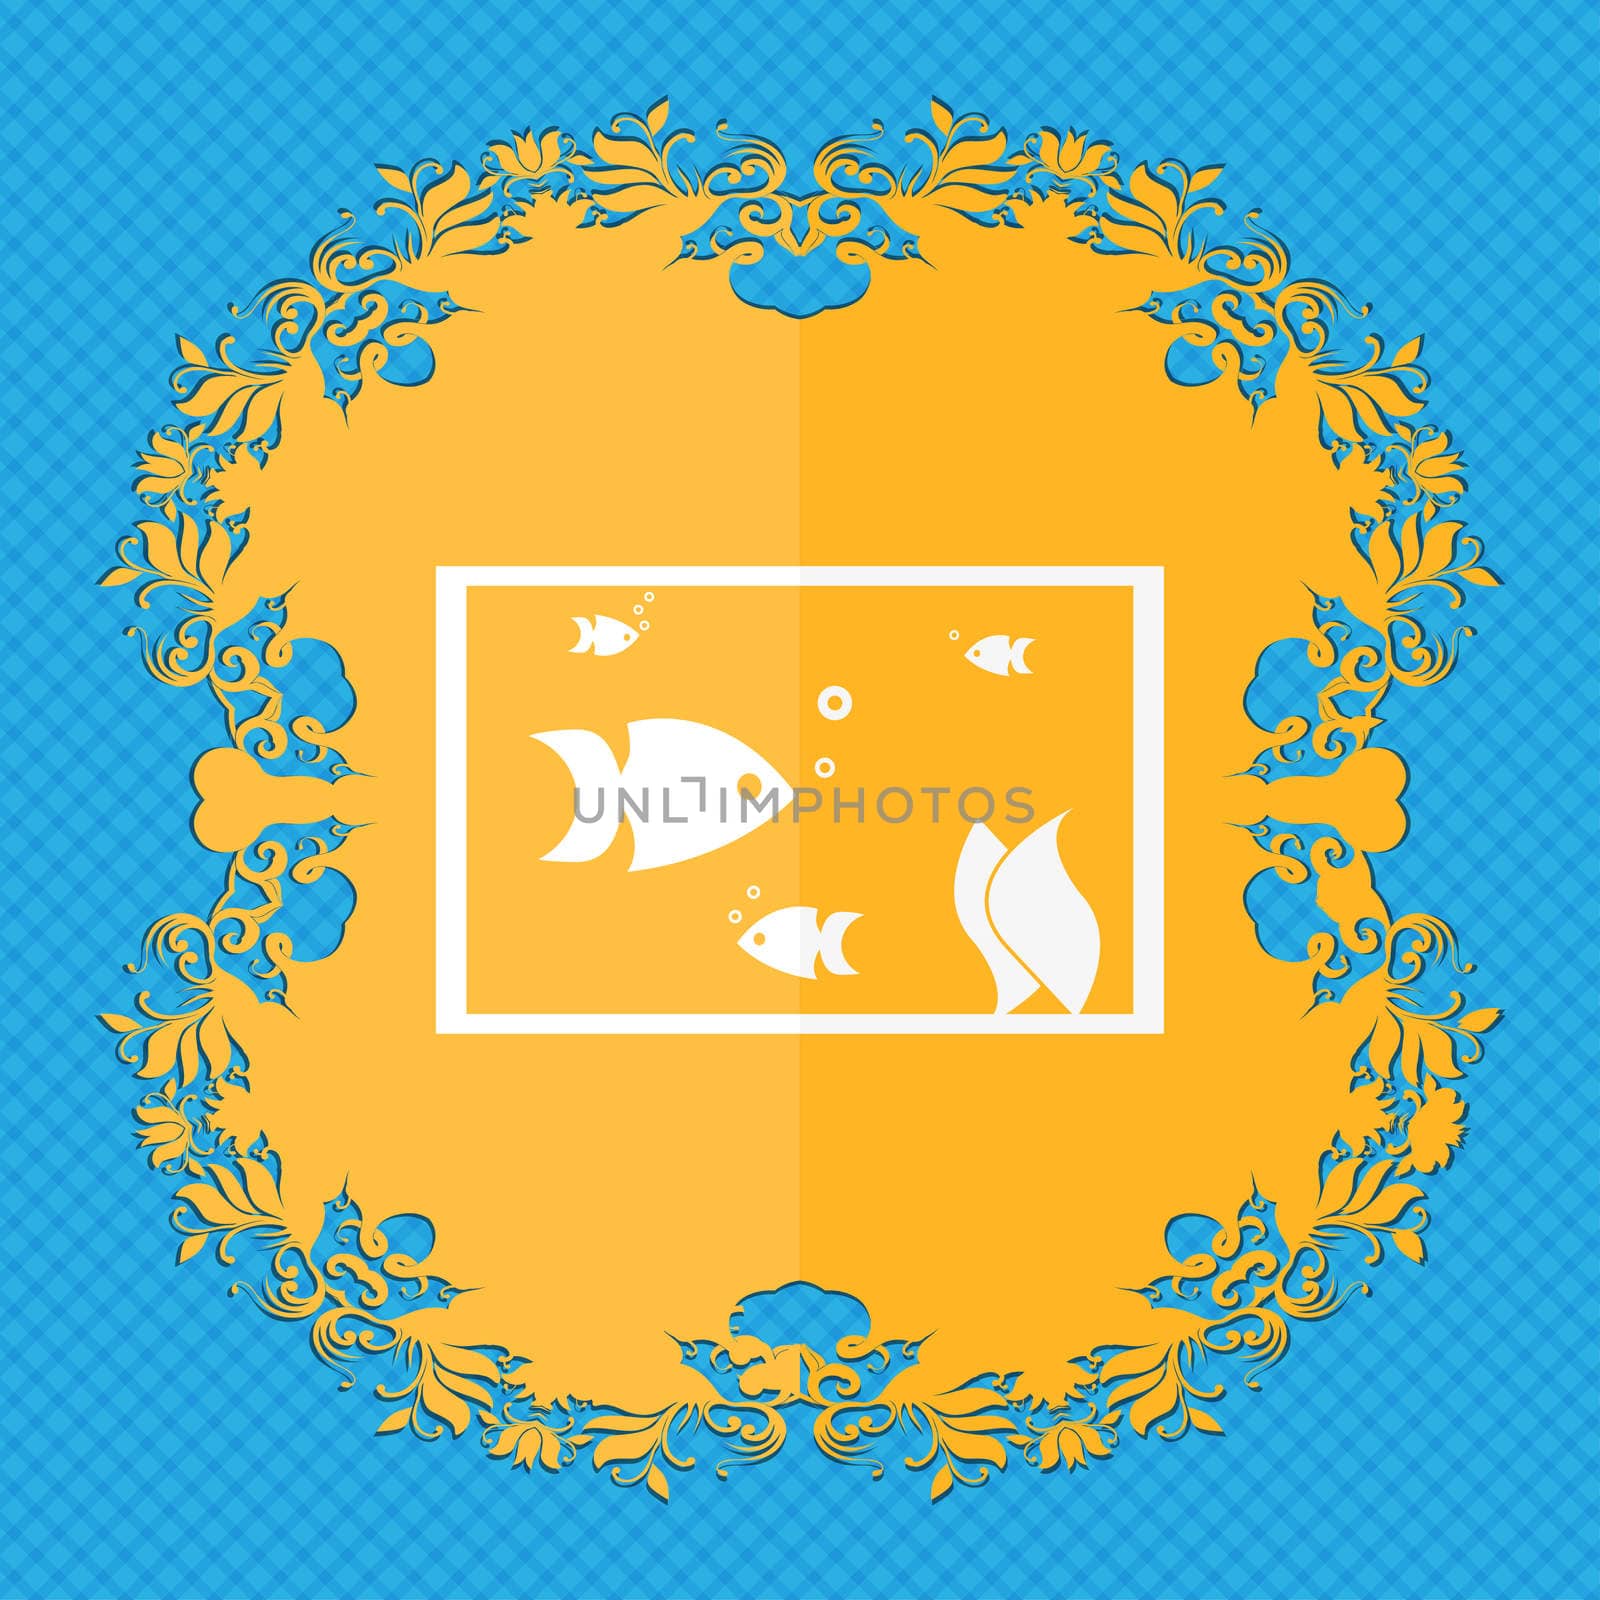 Aquarium, Fish in water icon sign. Floral flat design on a blue abstract background with place for your text. illustration